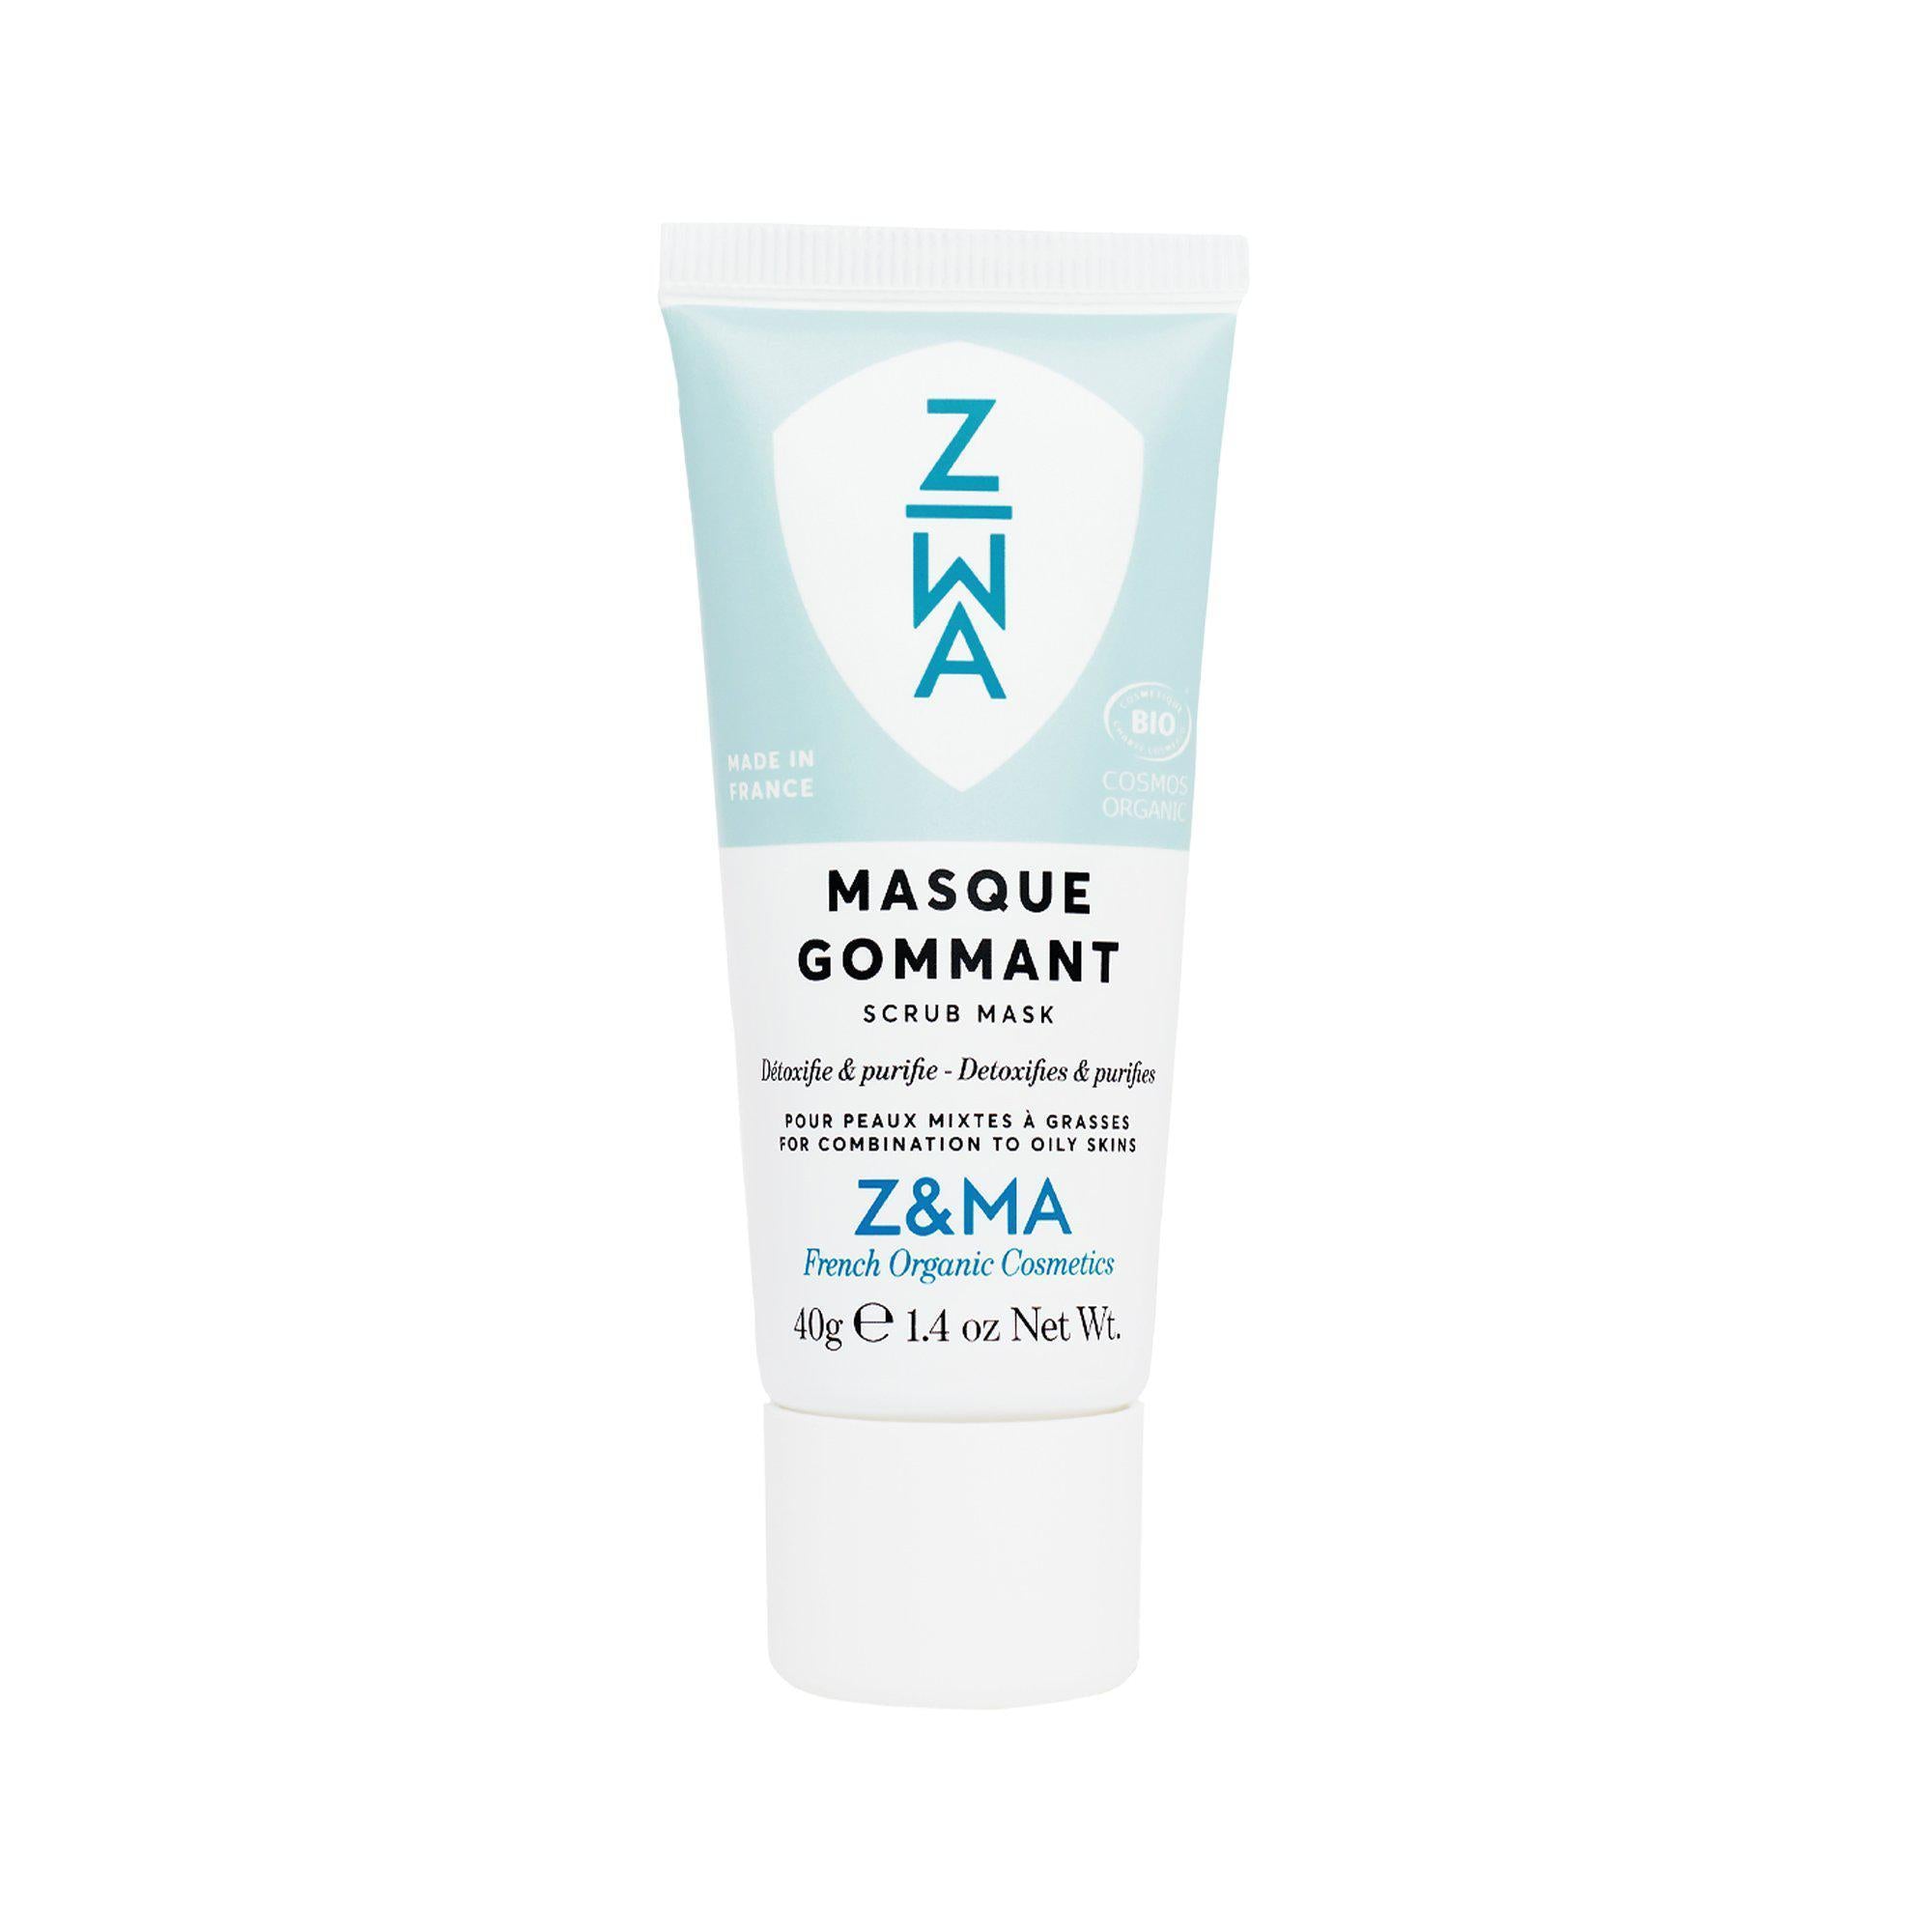 Masque Gommant Masque Gommant - Z&MA